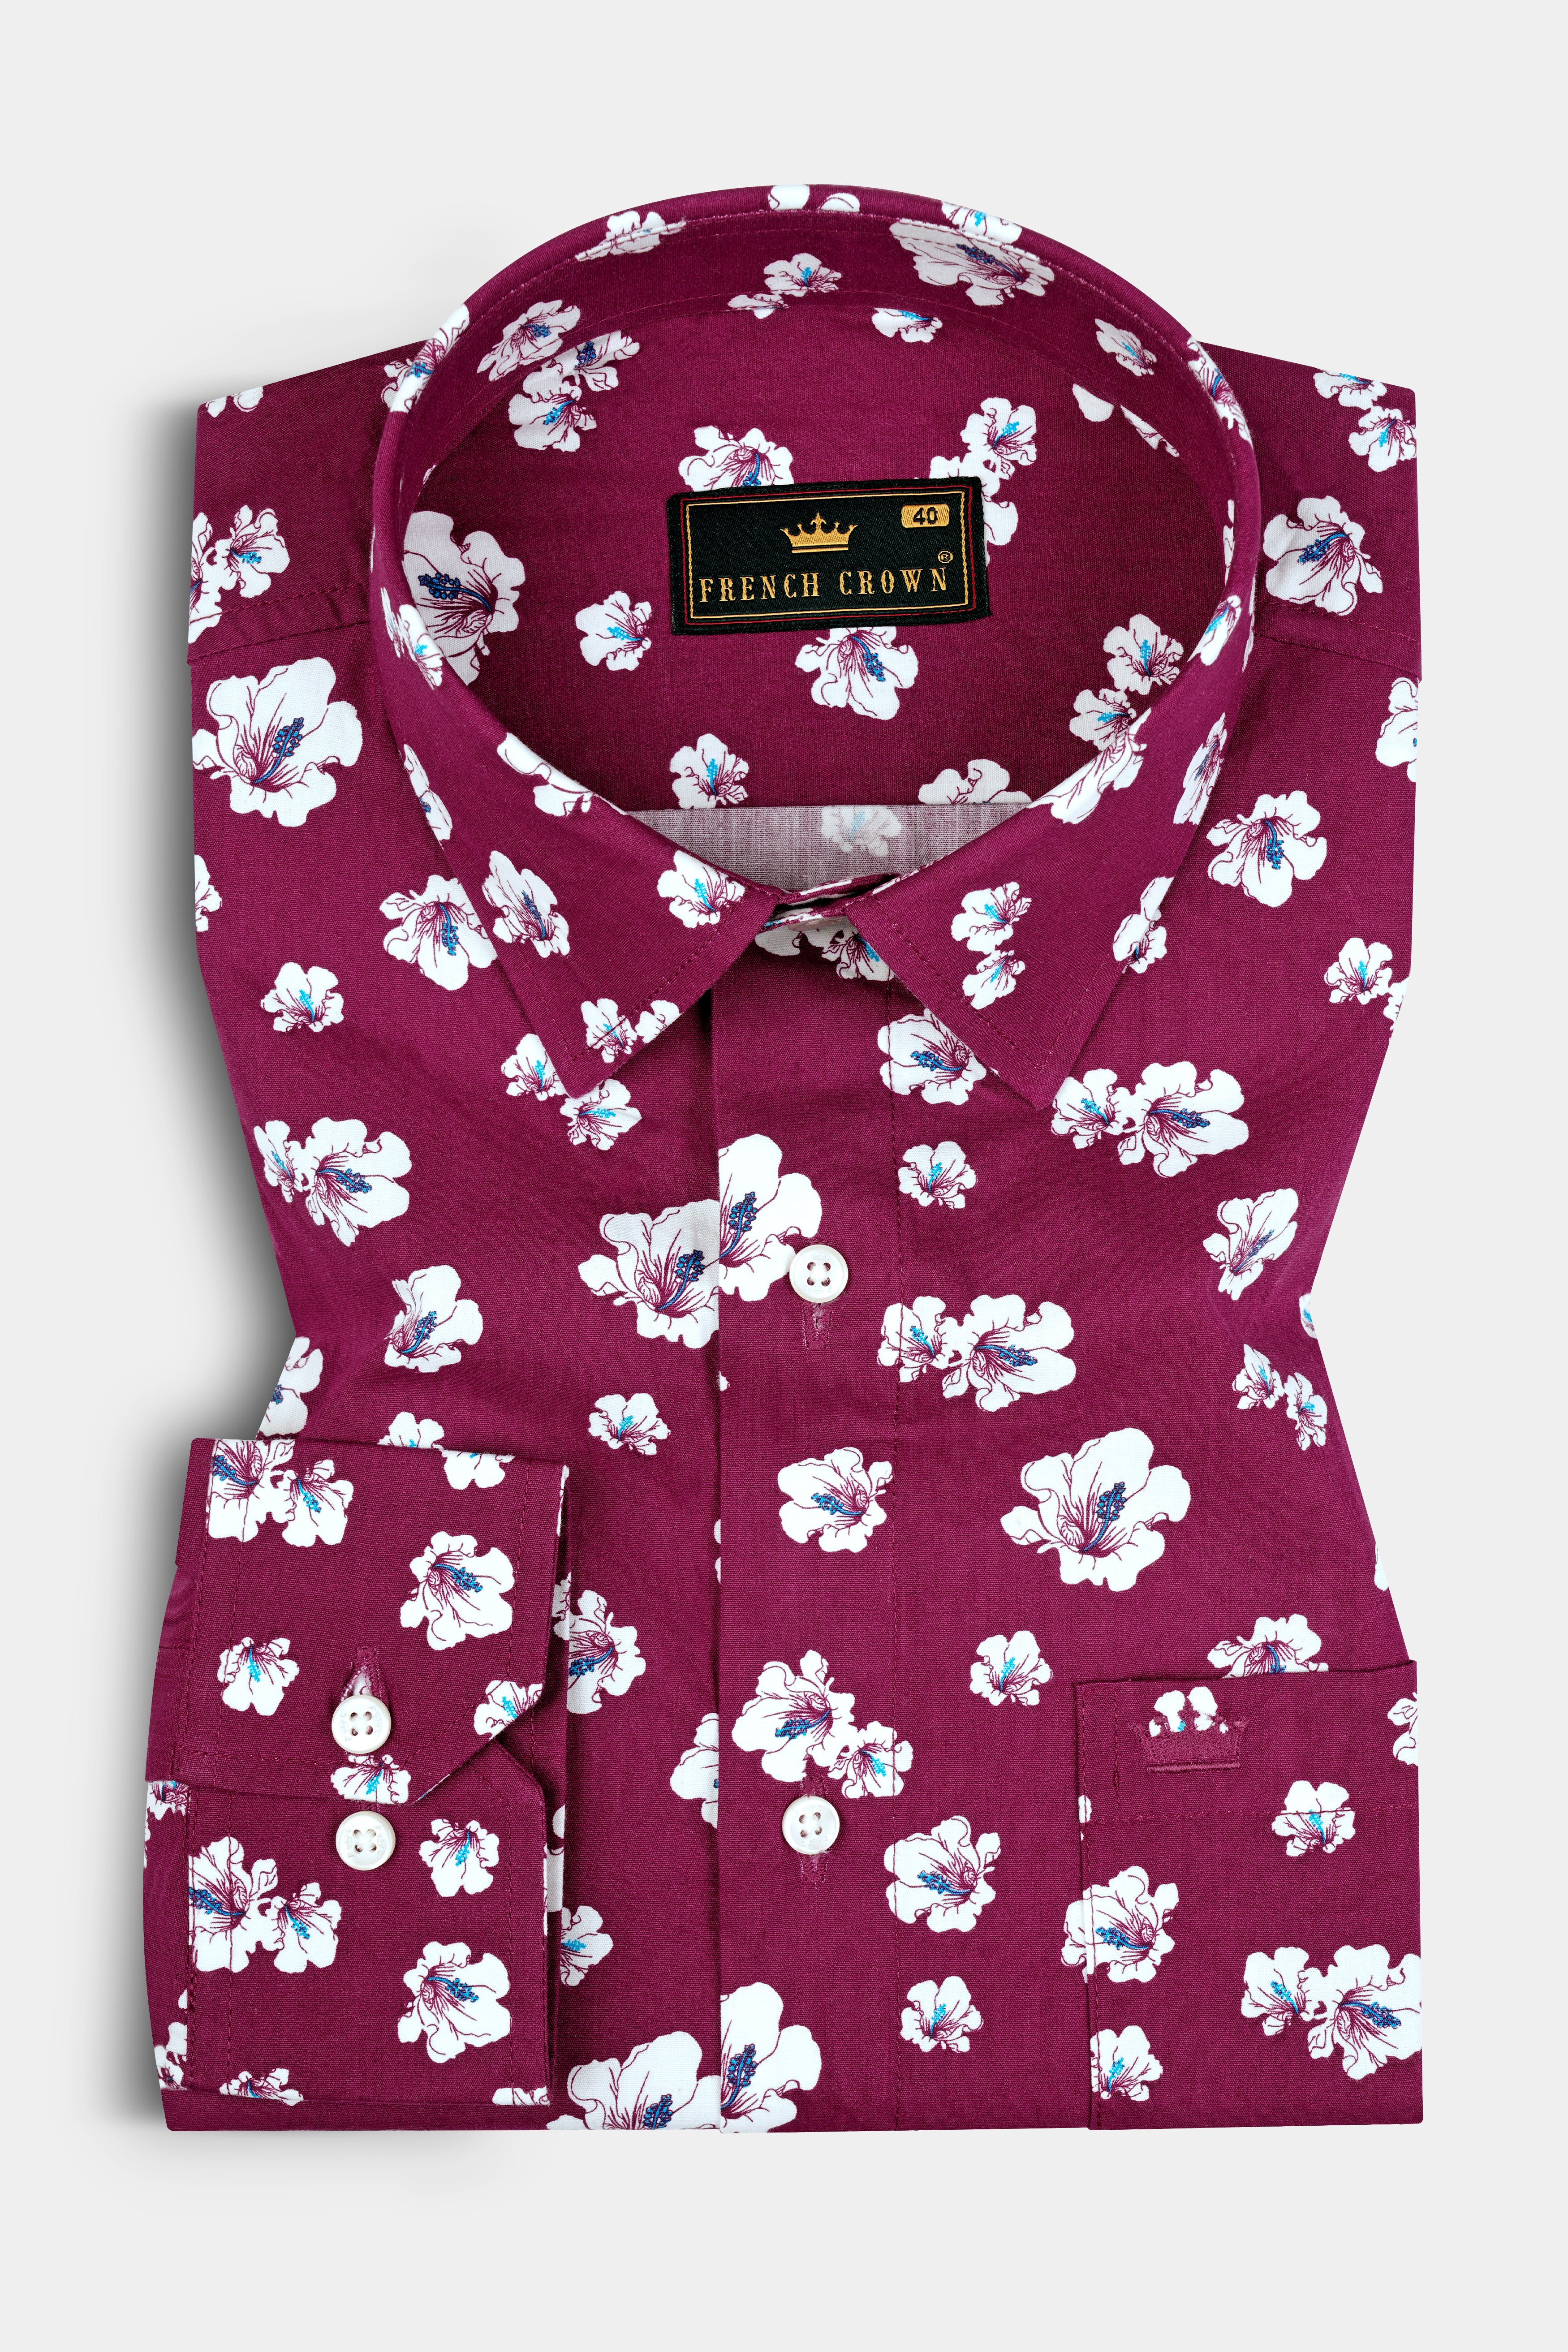 Camelot Red Floral Printed Twill Premium Cotton Shirt